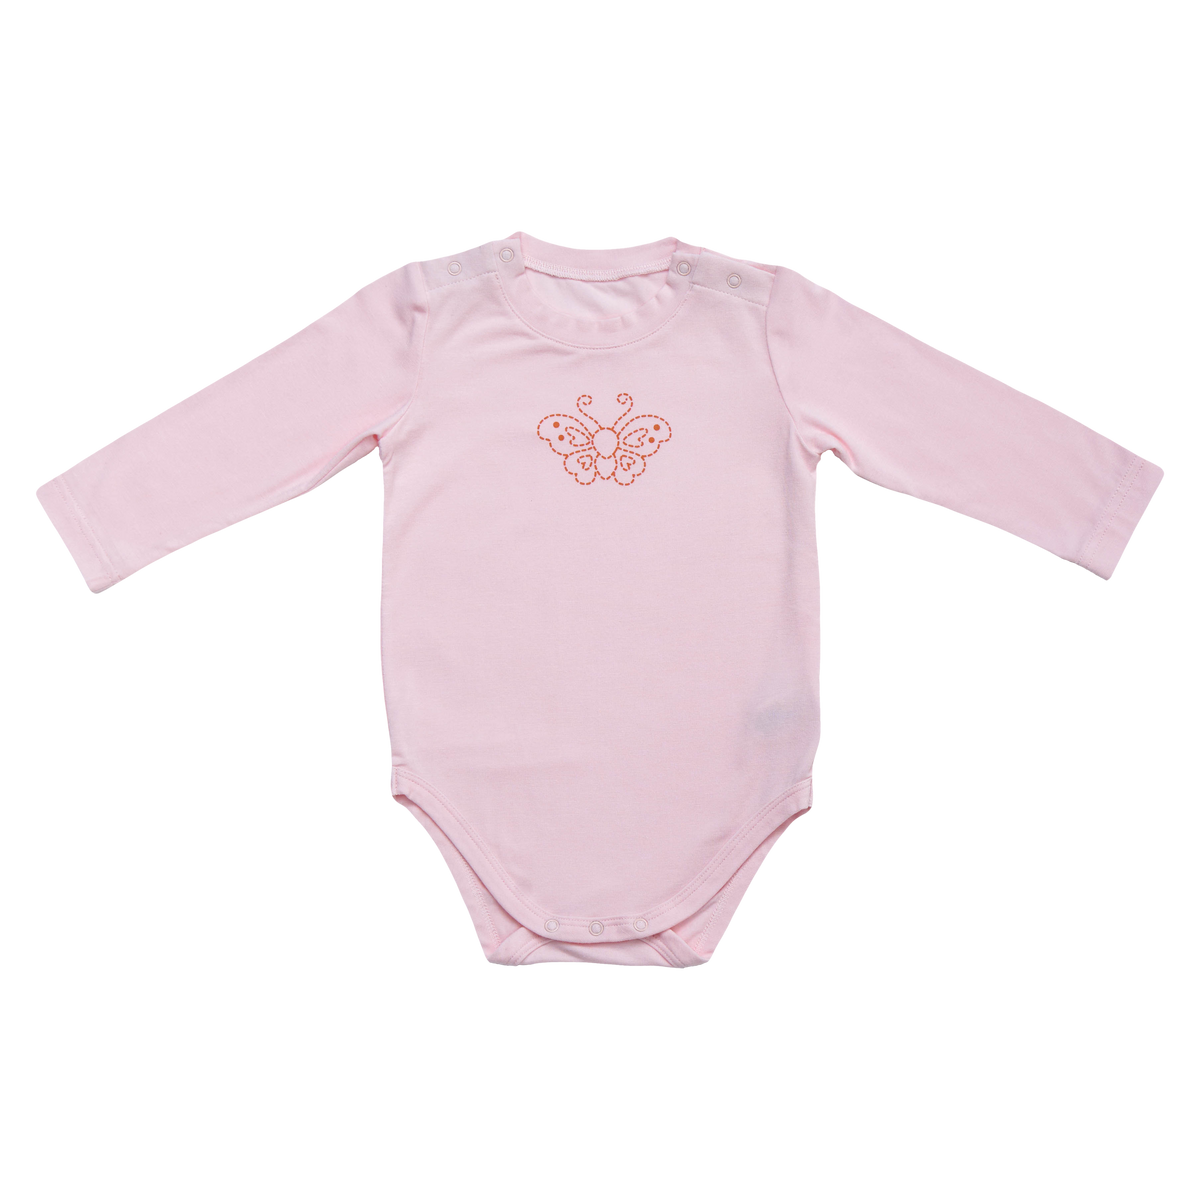 <tc>BABY cooling feeling longsleeve BODYSUIT WITH butterfly PRINT (Light Coral)</tc>